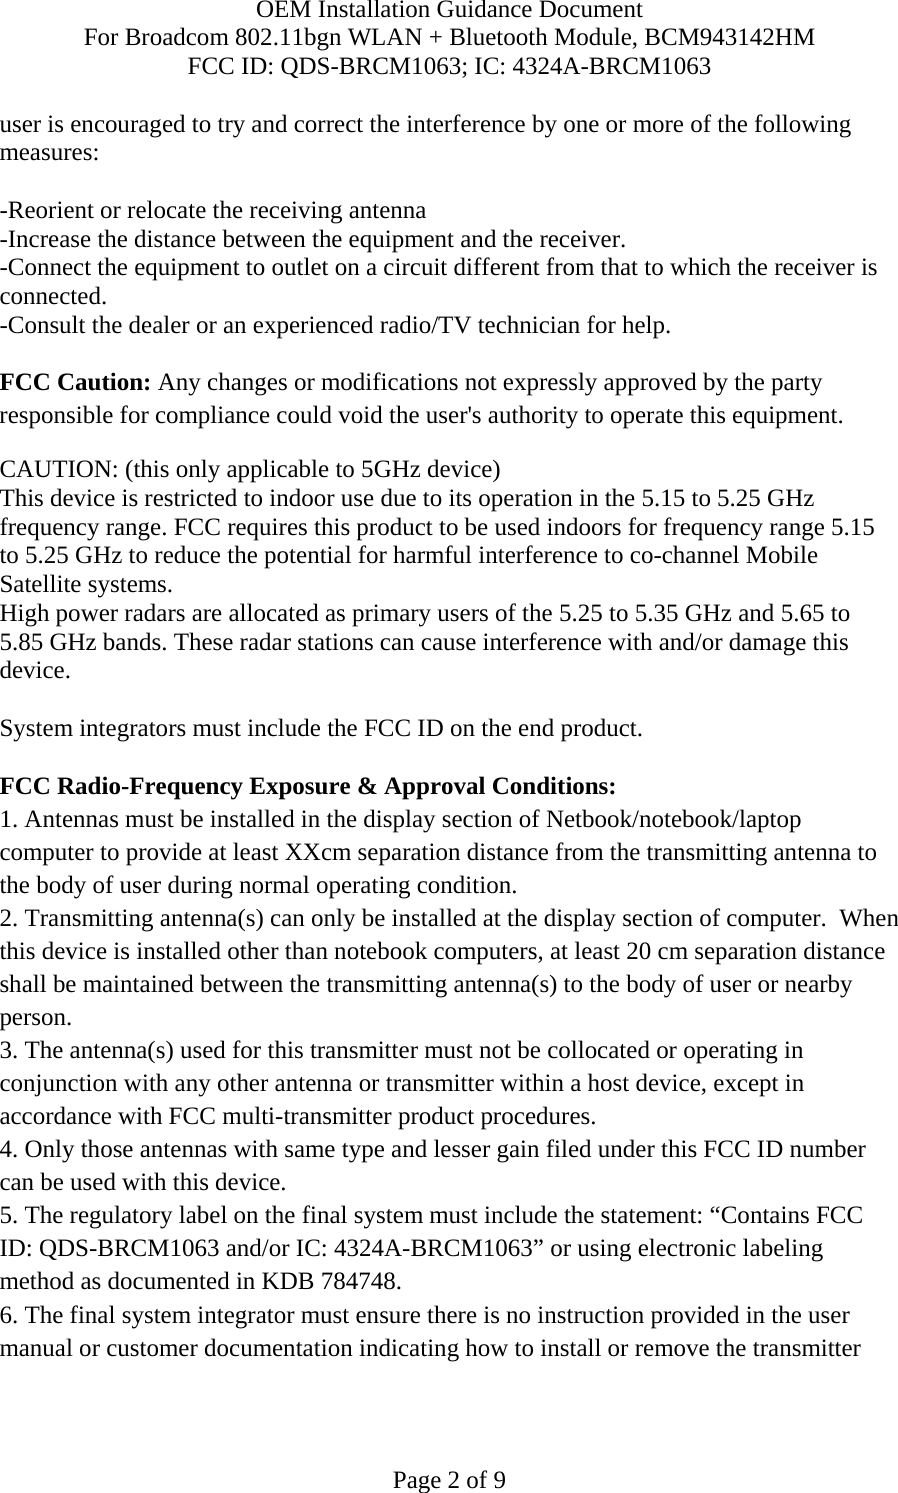 OEM Installation Guidance Document For Broadcom 802.11bgn WLAN + Bluetooth Module, BCM943142HM FCC ID: QDS-BRCM1063; IC: 4324A-BRCM1063  Page 2 of 9 user is encouraged to try and correct the interference by one or more of the following measures:   -Reorient or relocate the receiving antenna -Increase the distance between the equipment and the receiver. -Connect the equipment to outlet on a circuit different from that to which the receiver is connected. -Consult the dealer or an experienced radio/TV technician for help.  FCC Caution: Any changes or modifications not expressly approved by the party responsible for compliance could void the user&apos;s authority to operate this equipment. CAUTION: (this only applicable to 5GHz device) This device is restricted to indoor use due to its operation in the 5.15 to 5.25 GHz frequency range. FCC requires this product to be used indoors for frequency range 5.15 to 5.25 GHz to reduce the potential for harmful interference to co-channel Mobile Satellite systems. High power radars are allocated as primary users of the 5.25 to 5.35 GHz and 5.65 to 5.85 GHz bands. These radar stations can cause interference with and/or damage this device.  System integrators must include the FCC ID on the end product.   FCC Radio-Frequency Exposure &amp; Approval Conditions: 1. Antennas must be installed in the display section of Netbook/notebook/laptop computer to provide at least XXcm separation distance from the transmitting antenna to the body of user during normal operating condition. 2. Transmitting antenna(s) can only be installed at the display section of computer.  When this device is installed other than notebook computers, at least 20 cm separation distance shall be maintained between the transmitting antenna(s) to the body of user or nearby person. 3. The antenna(s) used for this transmitter must not be collocated or operating in conjunction with any other antenna or transmitter within a host device, except in accordance with FCC multi-transmitter product procedures. 4. Only those antennas with same type and lesser gain filed under this FCC ID number can be used with this device. 5. The regulatory label on the final system must include the statement: “Contains FCC ID: QDS-BRCM1063 and/or IC: 4324A-BRCM1063” or using electronic labeling method as documented in KDB 784748. 6. The final system integrator must ensure there is no instruction provided in the user manual or customer documentation indicating how to install or remove the transmitter 